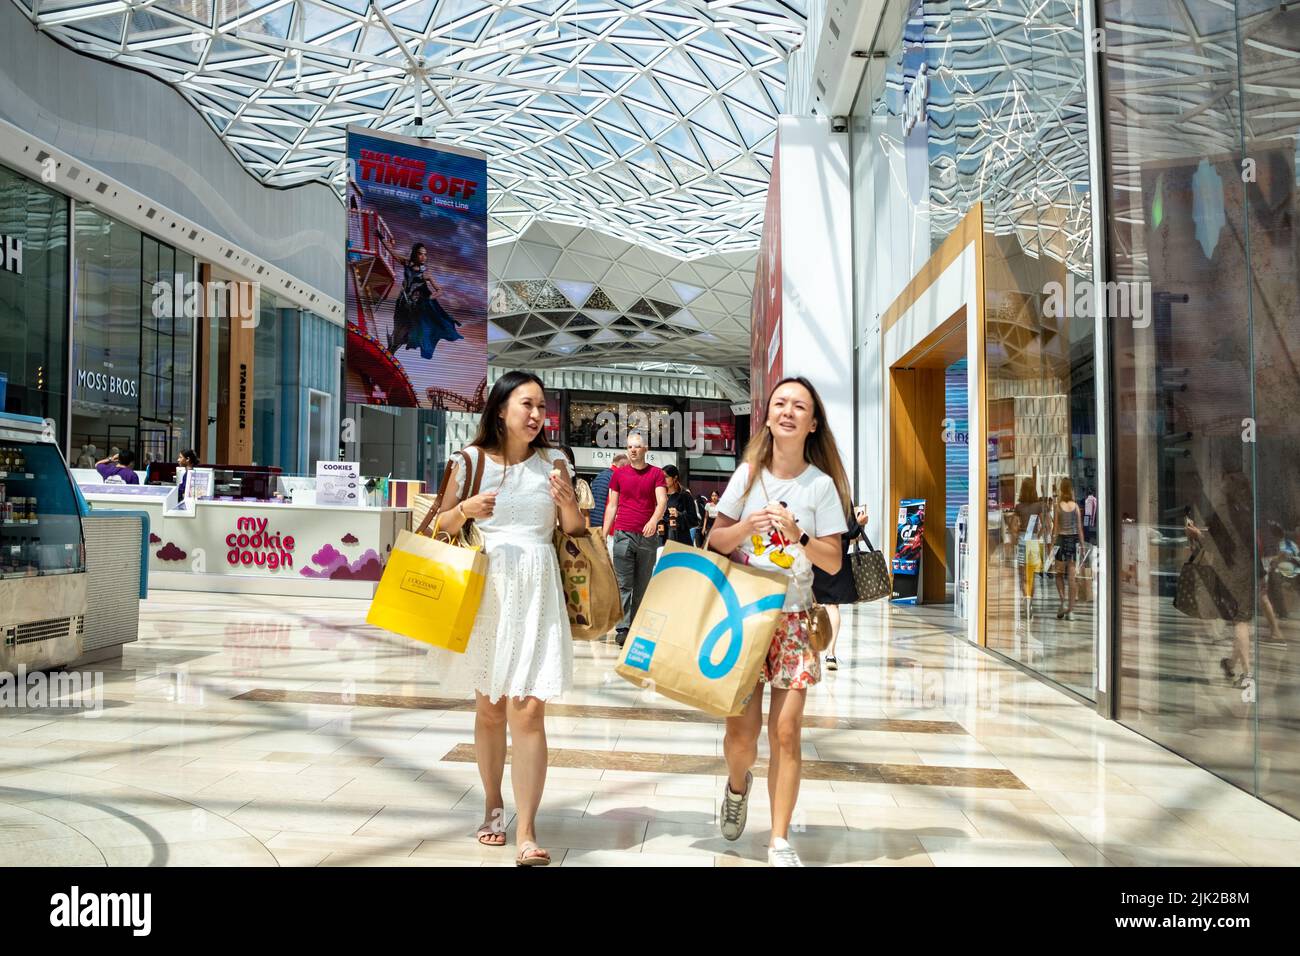 Coronation bank holiday: What are the opening times for Westfield London?, UK News